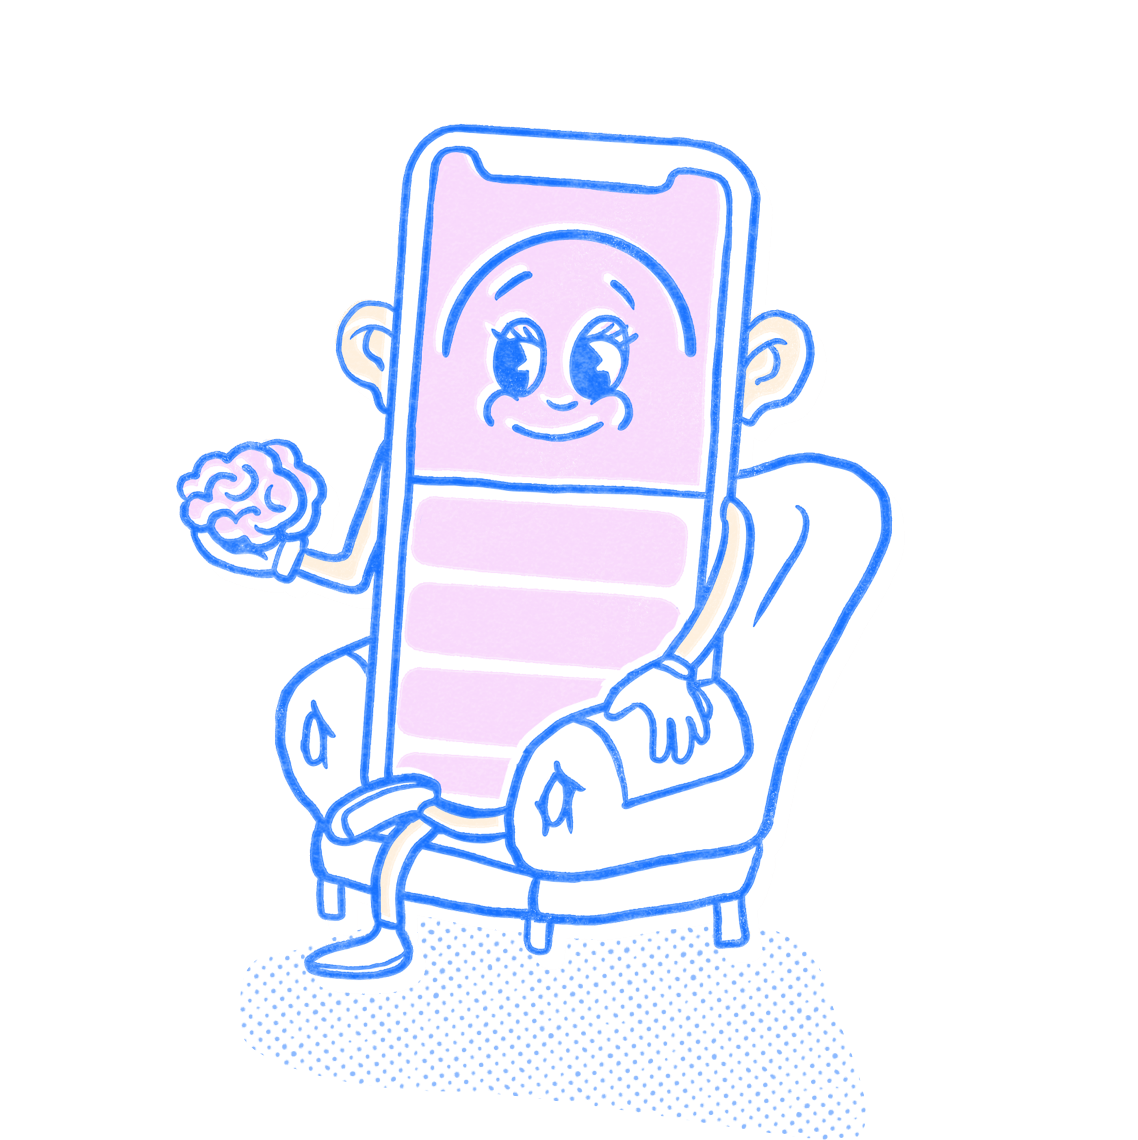 Behavioral Health Pocket Prep mascot sits in a chair with big ears and holds a brain. Illustration.